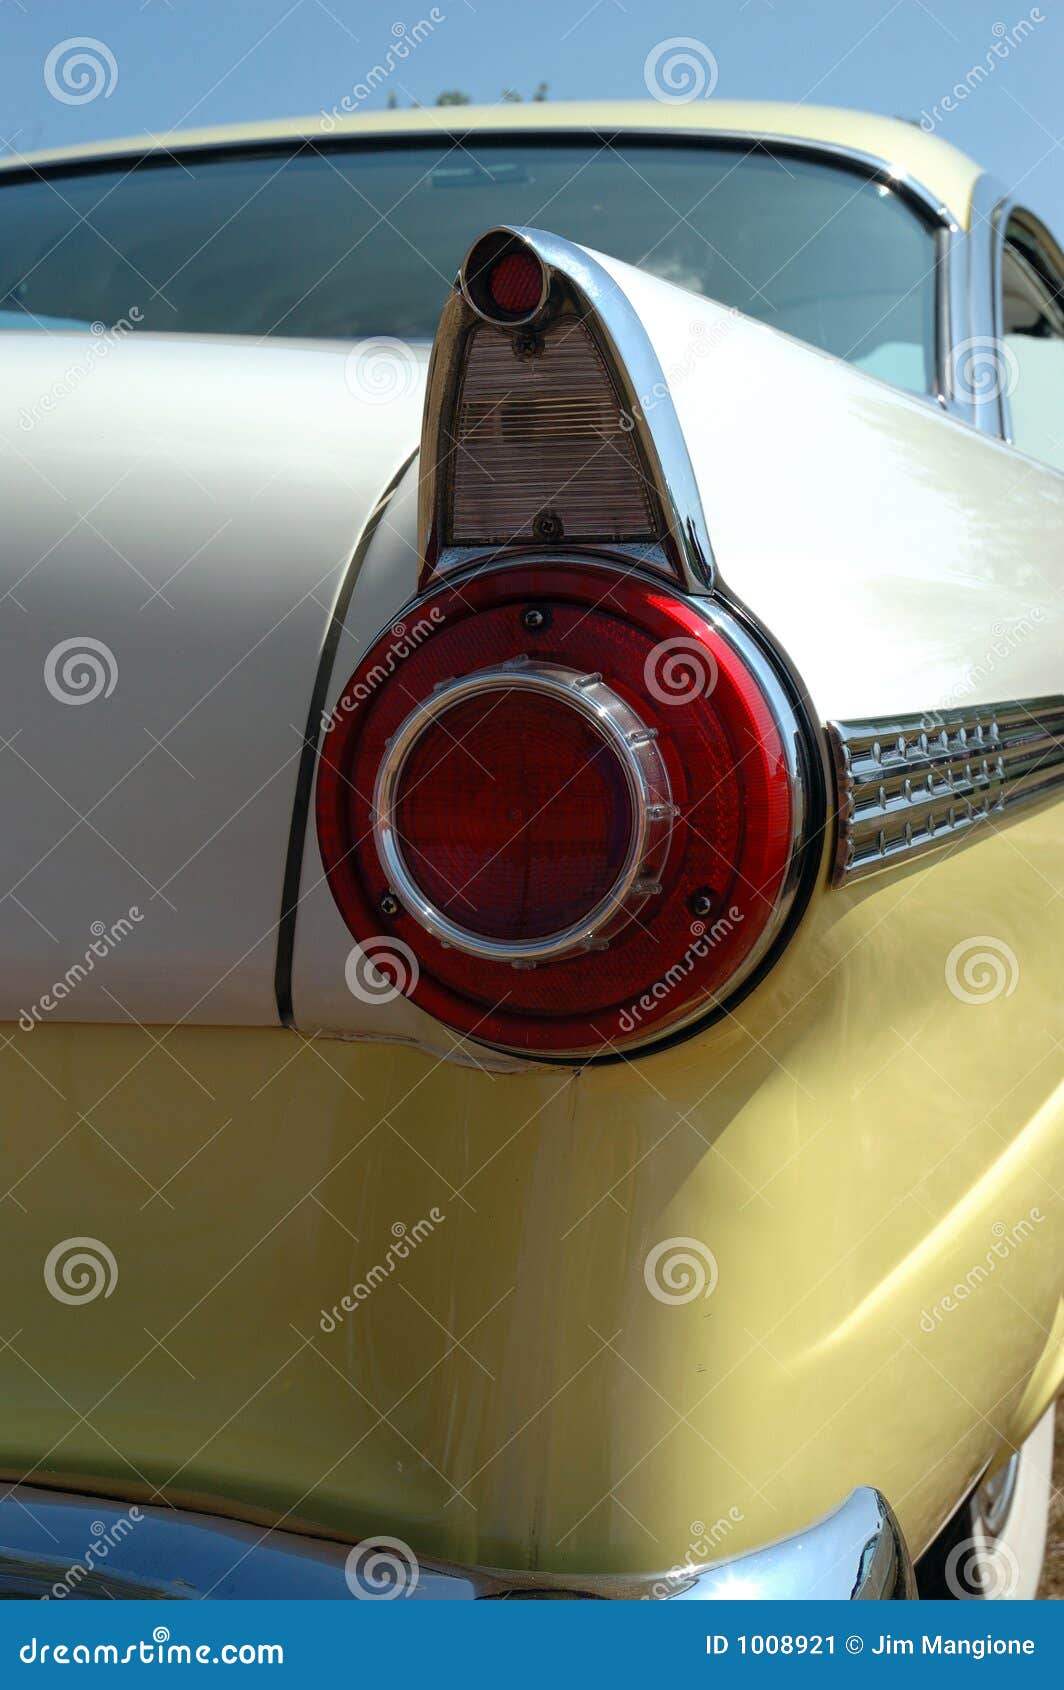 Rear Classic Car stock image. Image of plymouth, light - 1008921